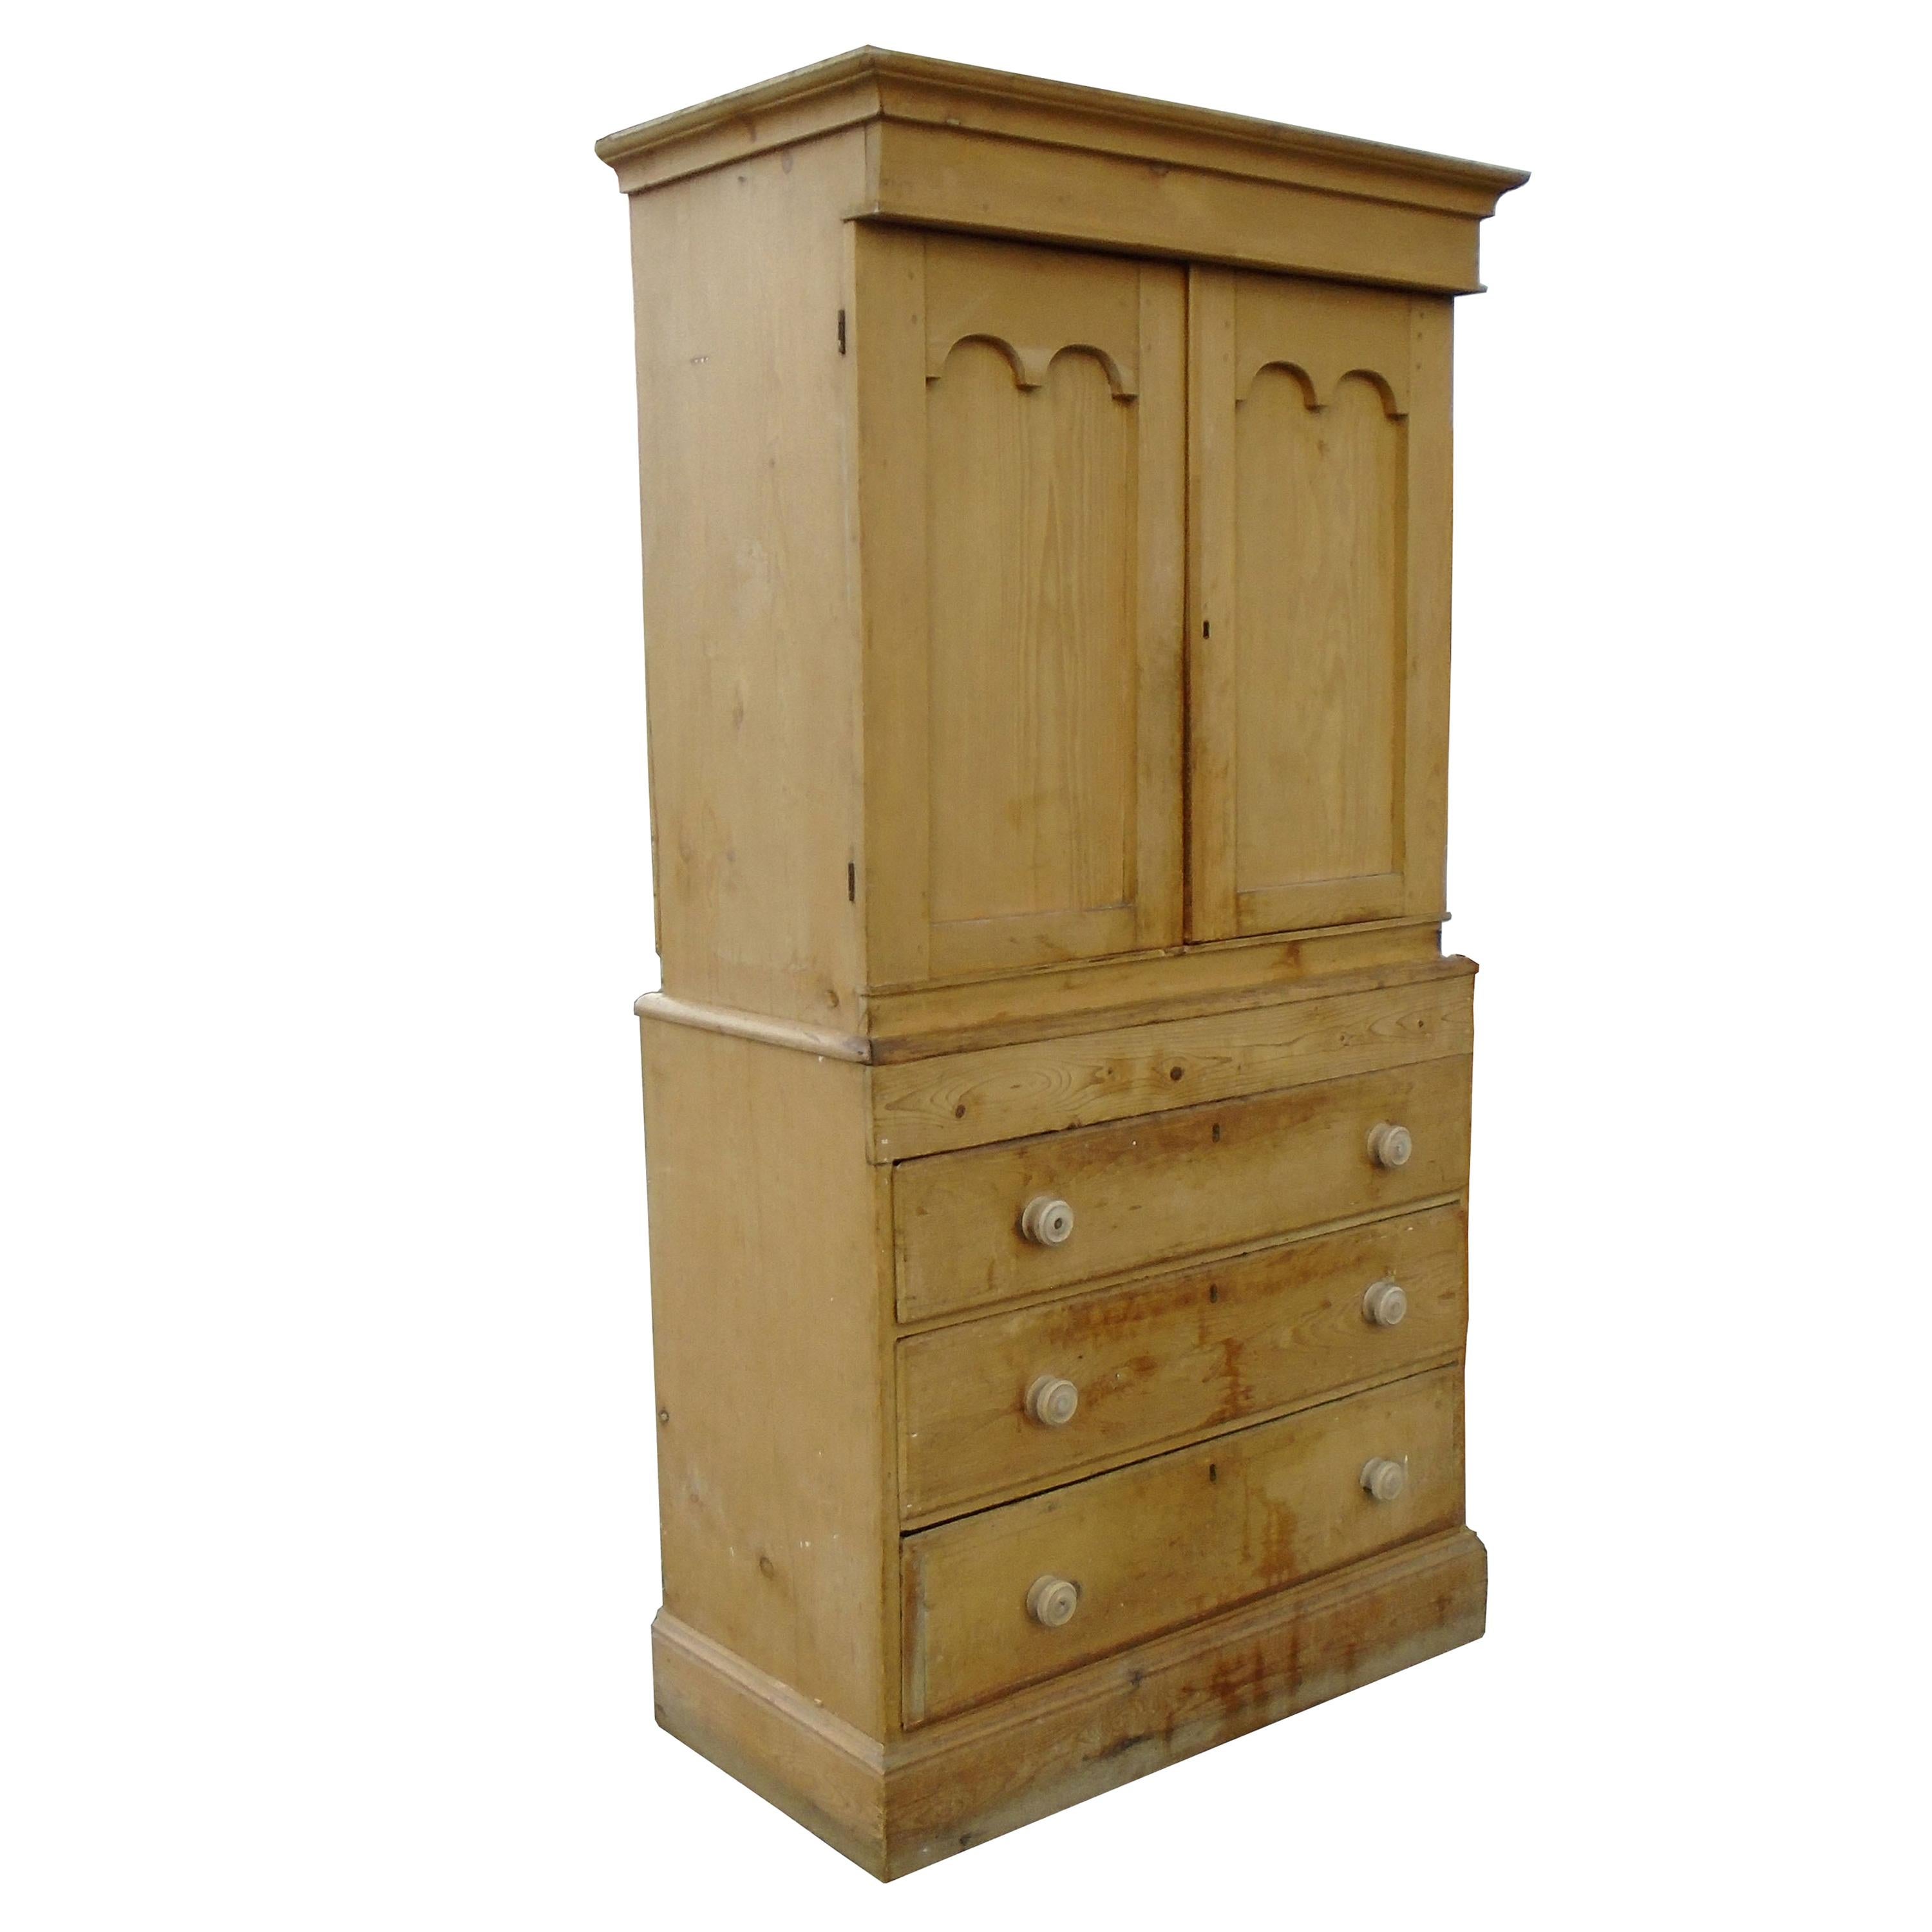 Early 20th Century Rustic Antique Pine Cupboard Cabinet For Sale